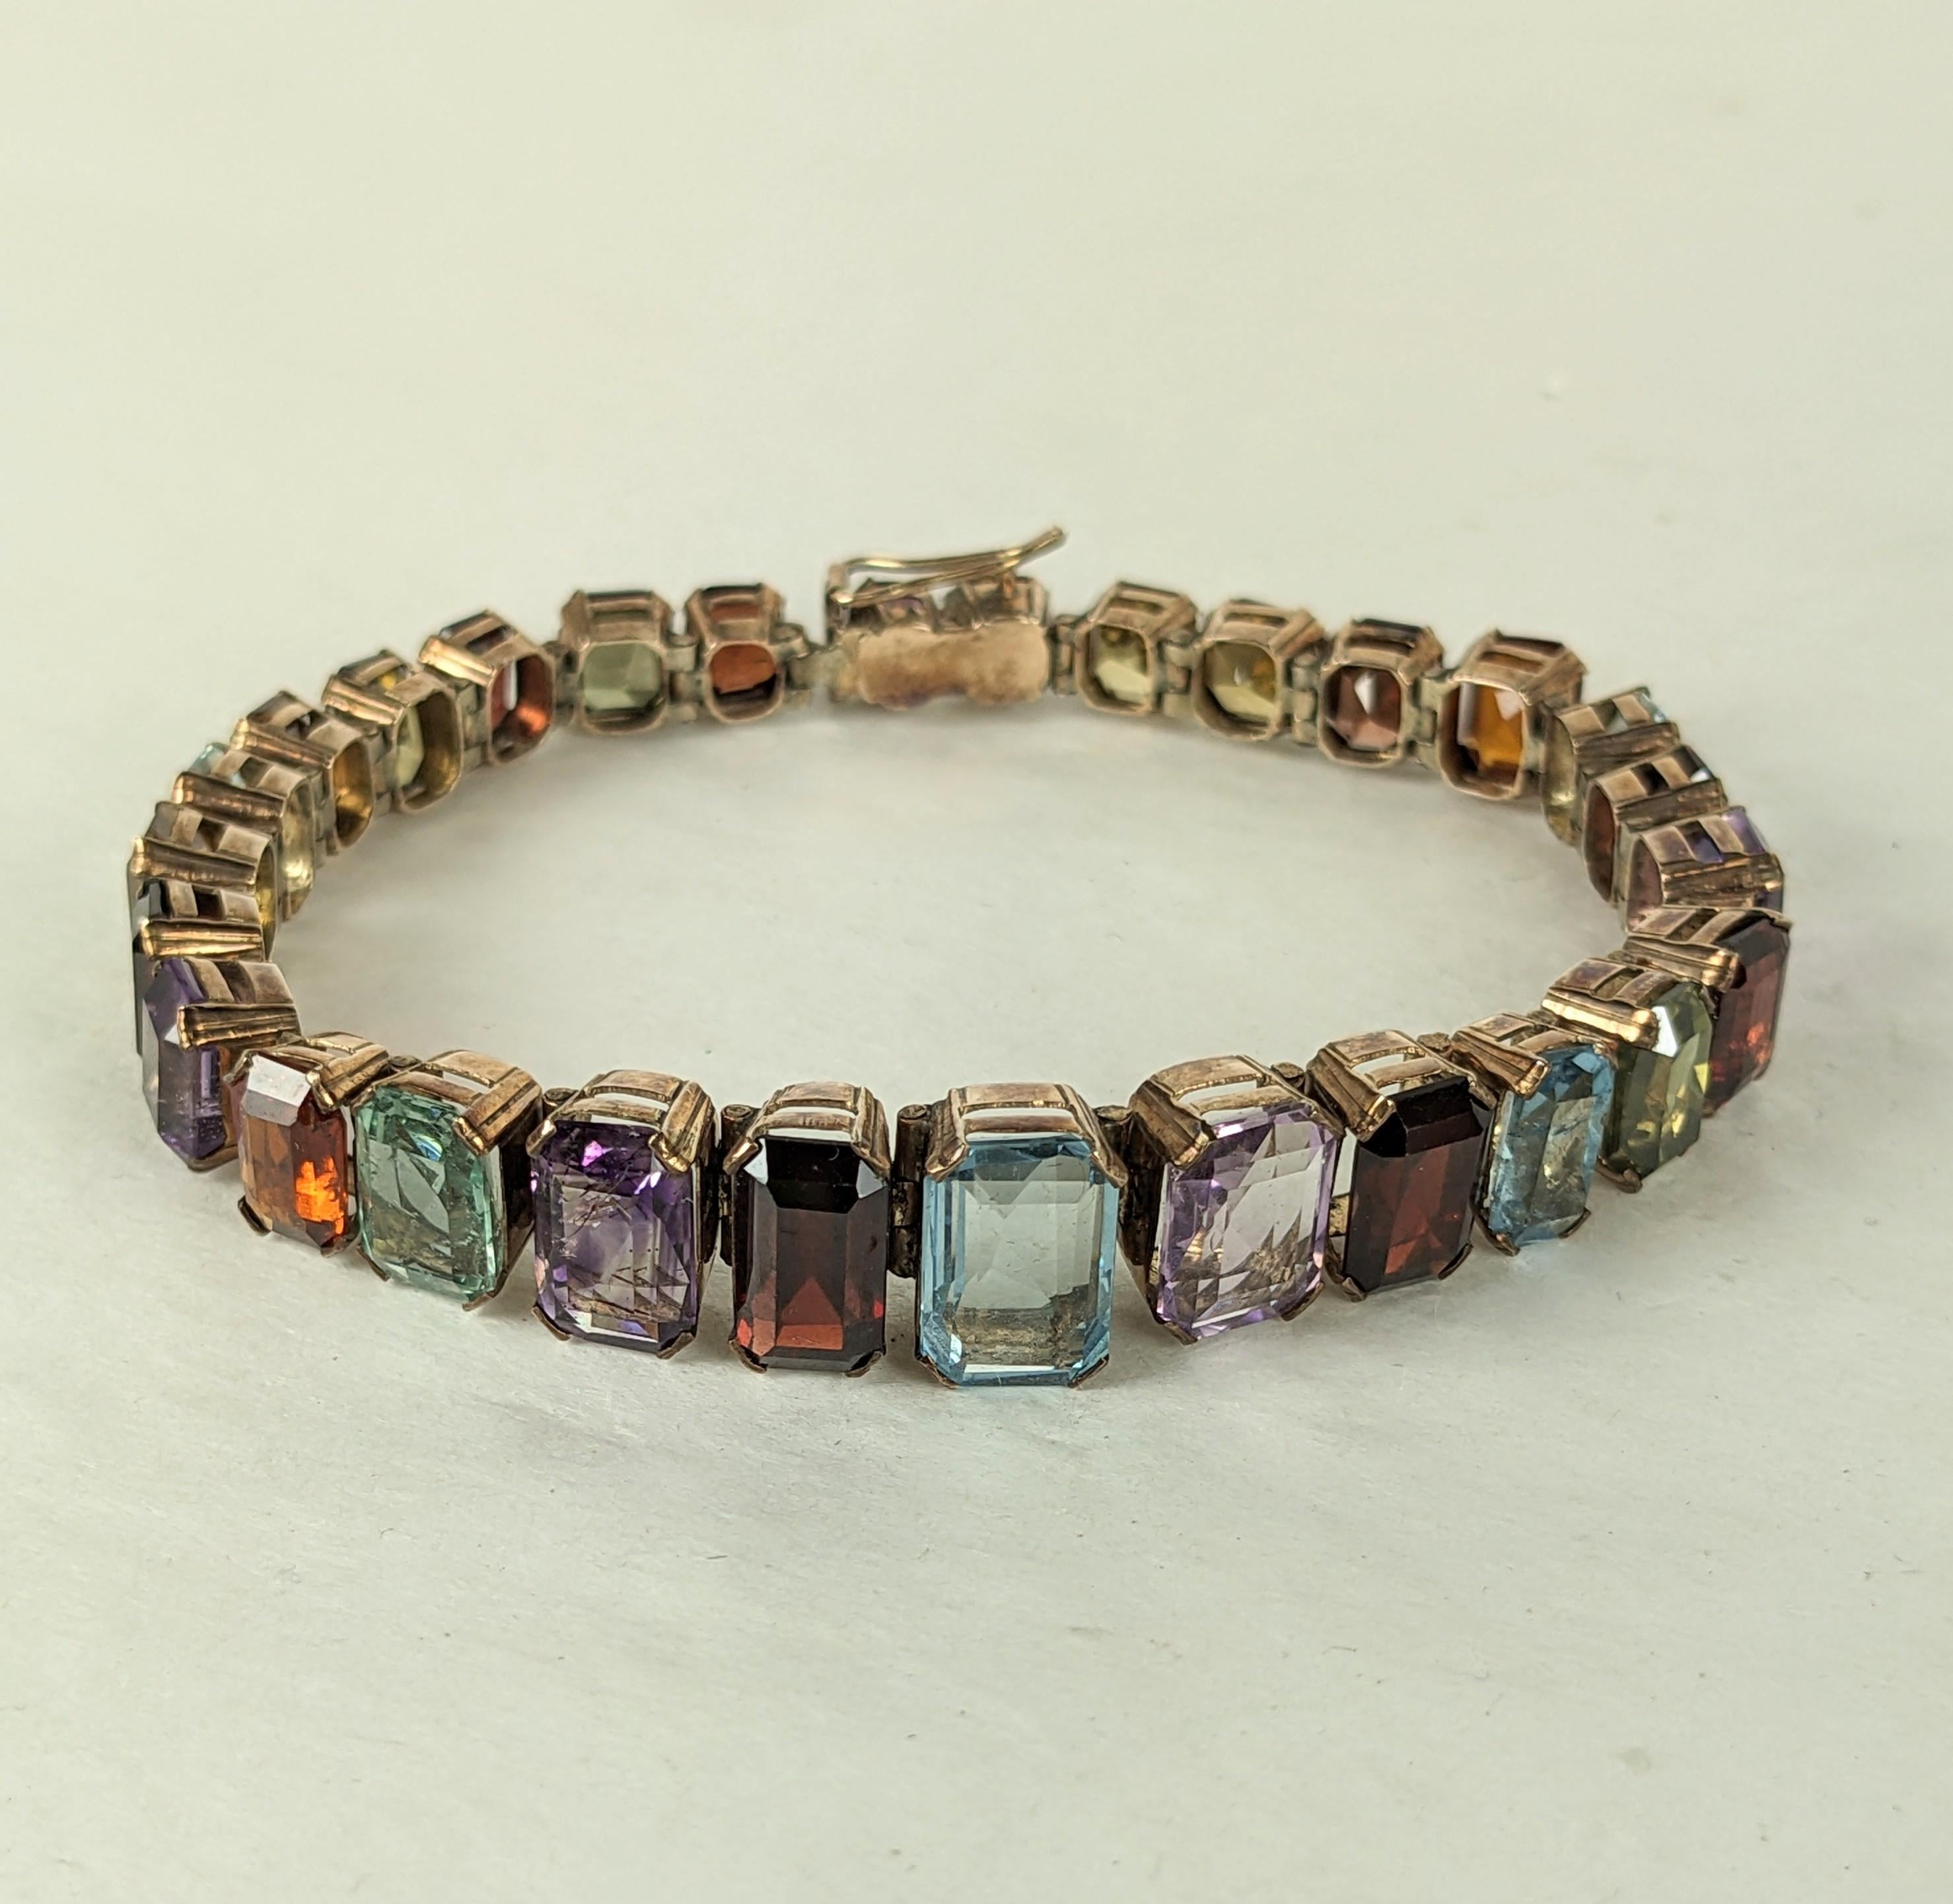 Attractive and Unusual Art Deco Multi Gem Line Bracelet in sterling vermeil from the 1940's. Unusual bracelet with rectangular, graduated gemstones with slight tonal variations and cuts, each in its own articulated setting. Lovely array of colored